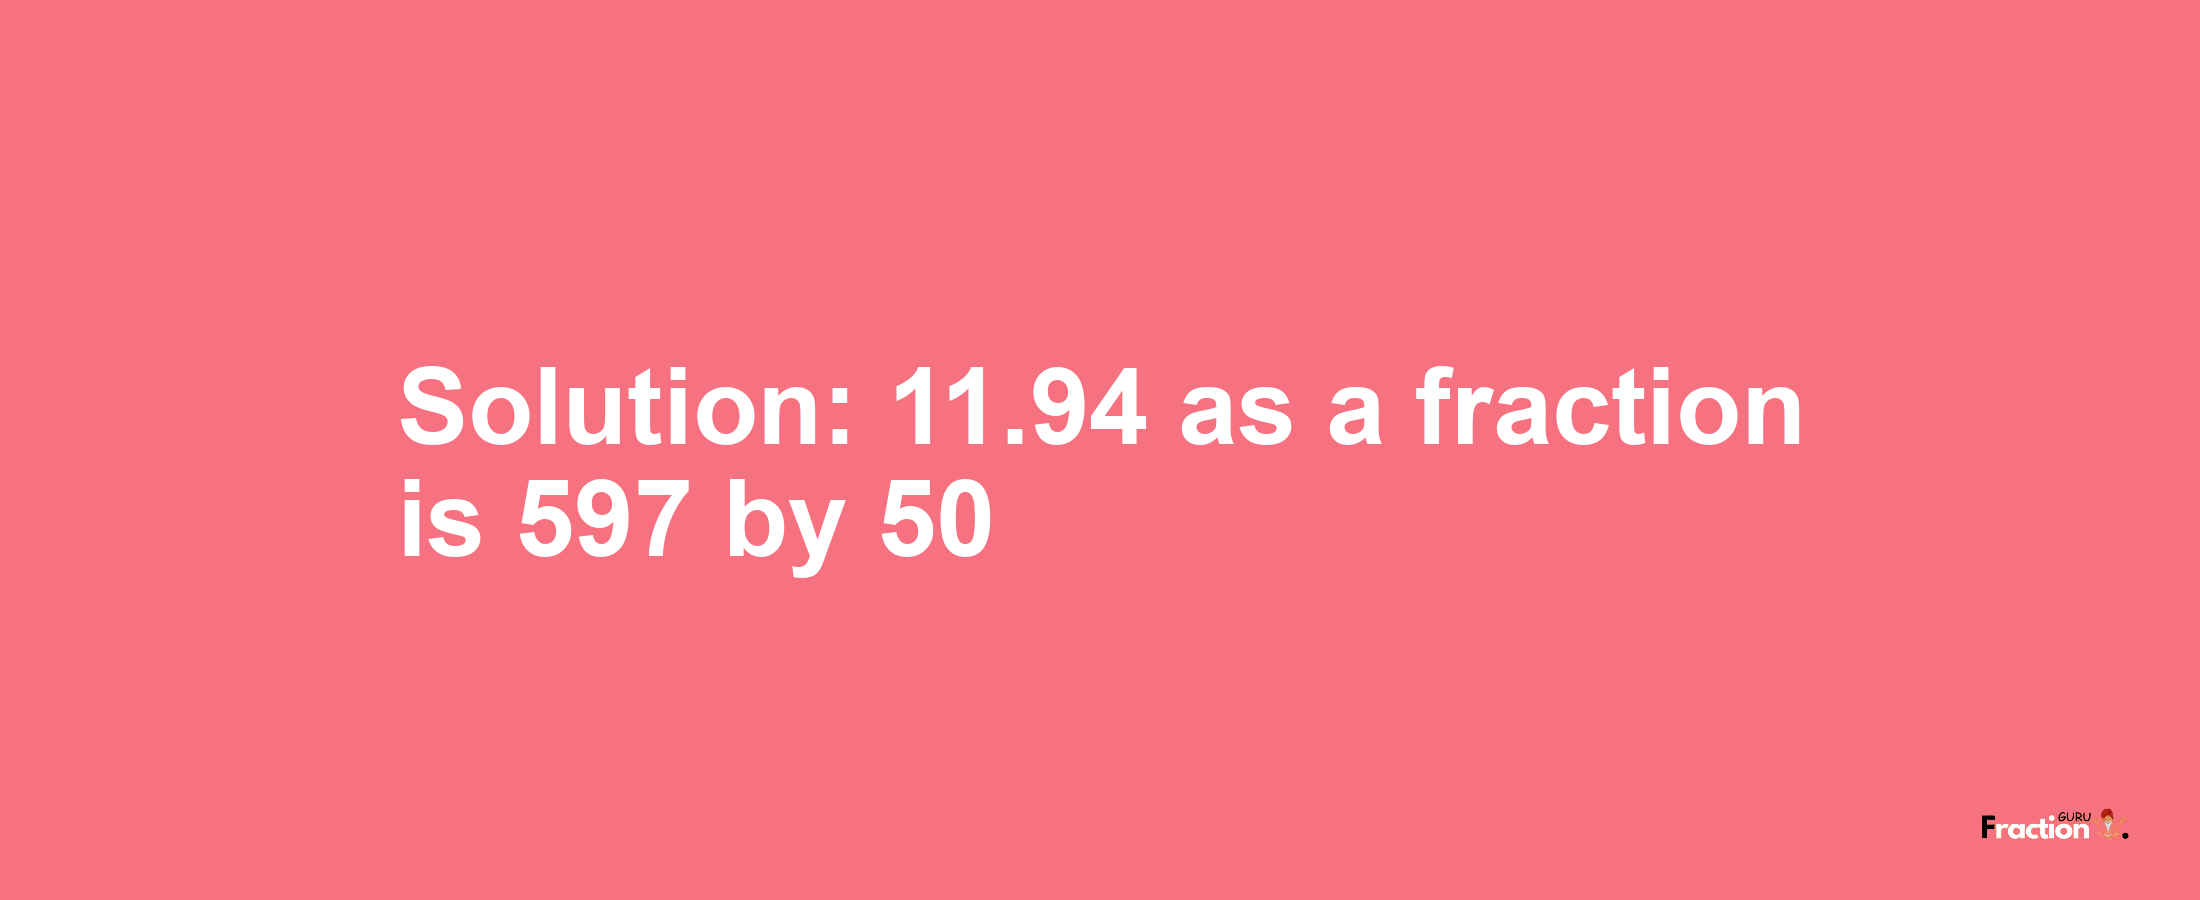 Solution:11.94 as a fraction is 597/50